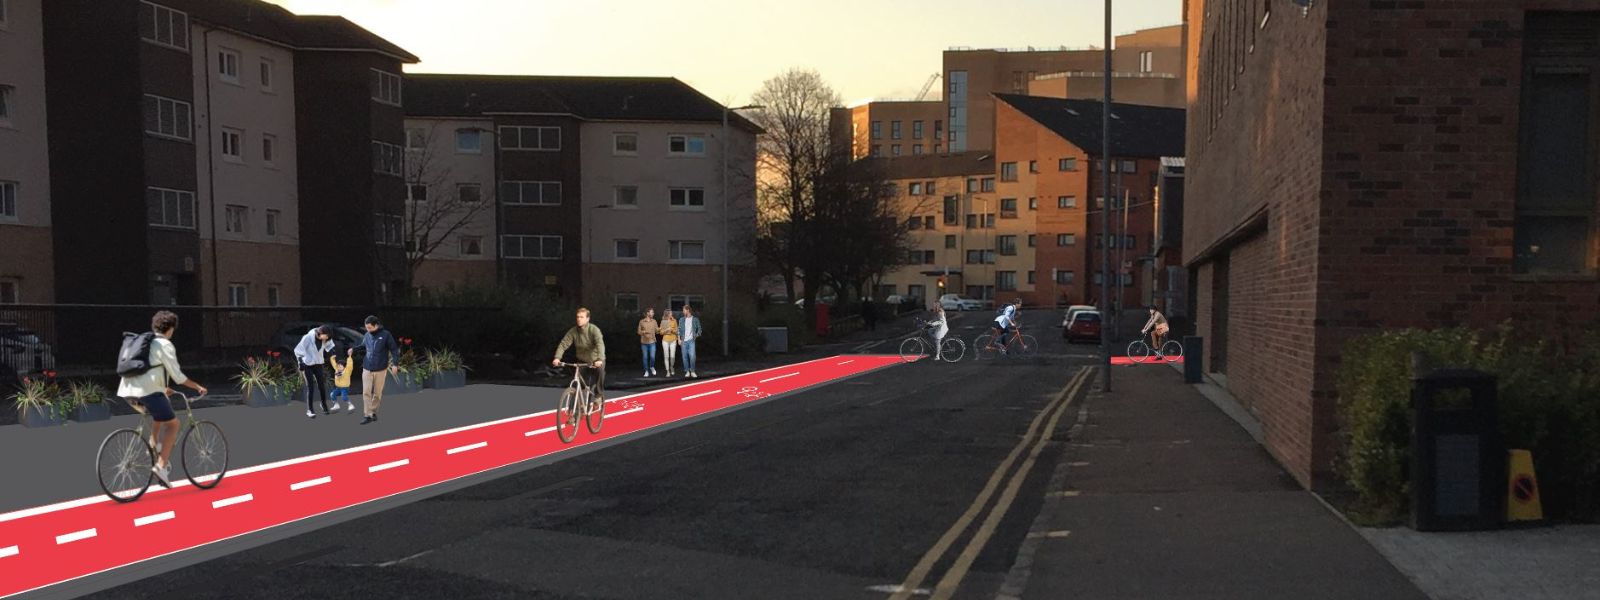 Vision for Kennedy Street with an added cycle lane